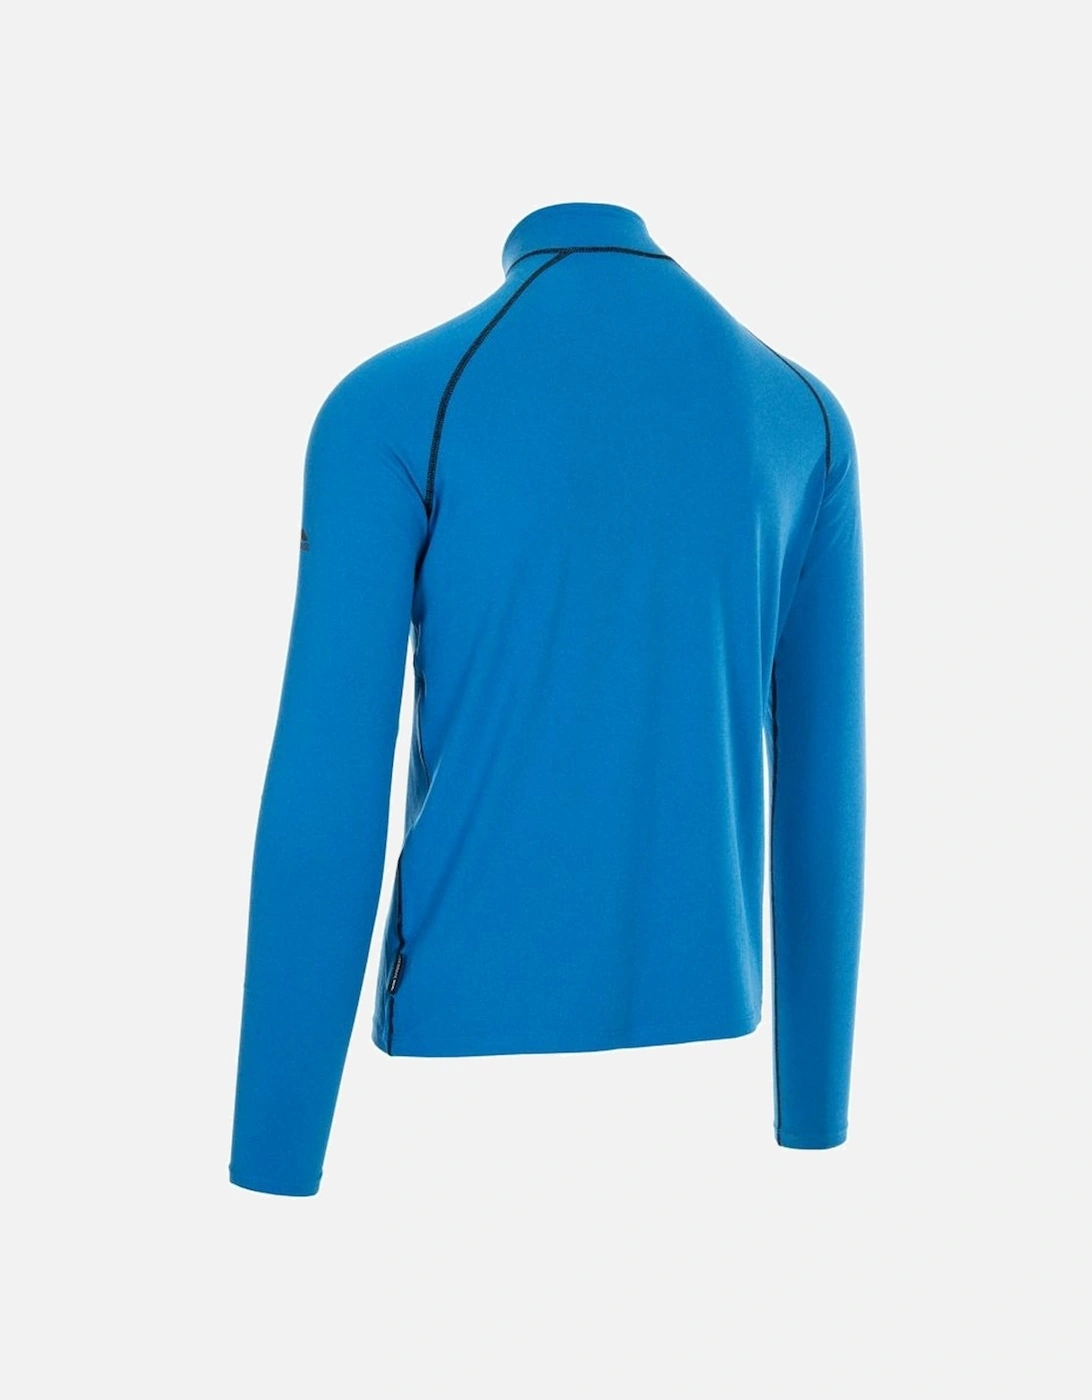 Mens Arlo Long Sleeve Quick Dry Active Top